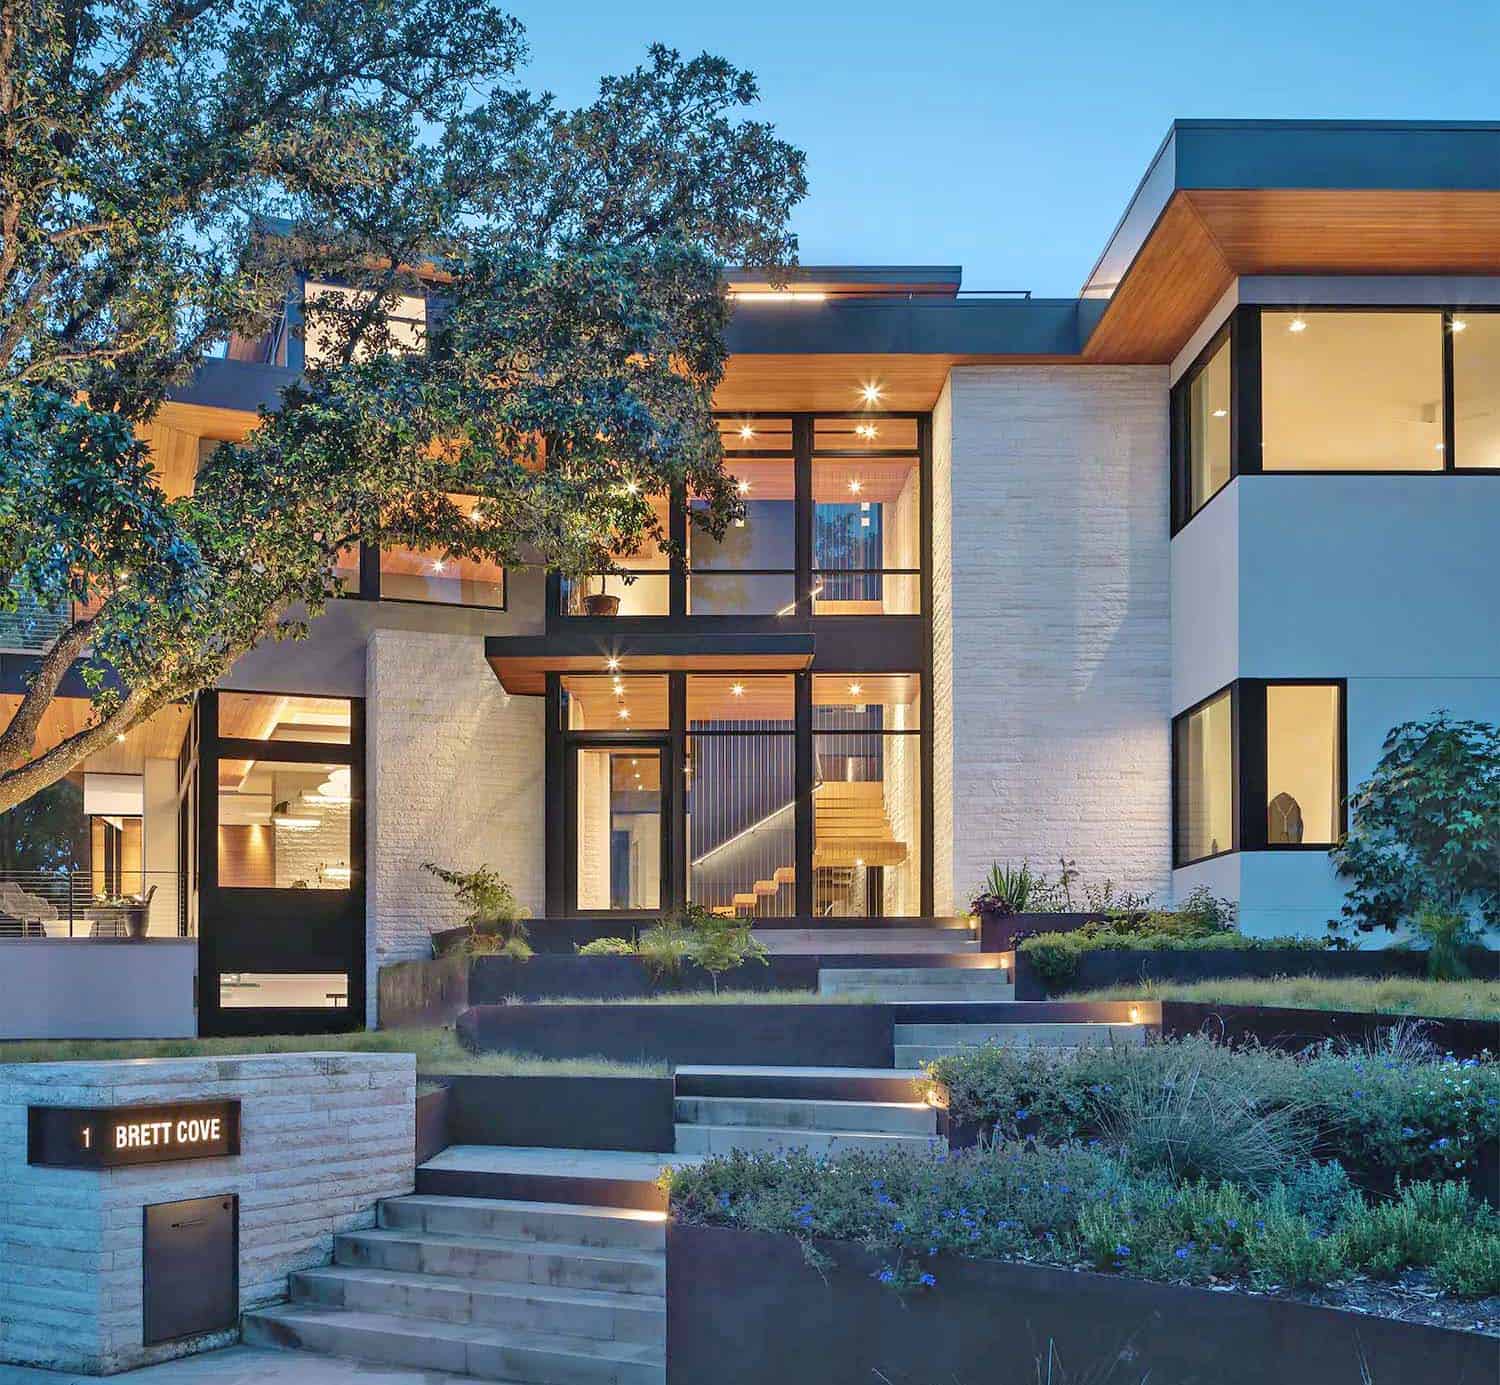 A spectacular modern Texas hill country home embraces the outdoors